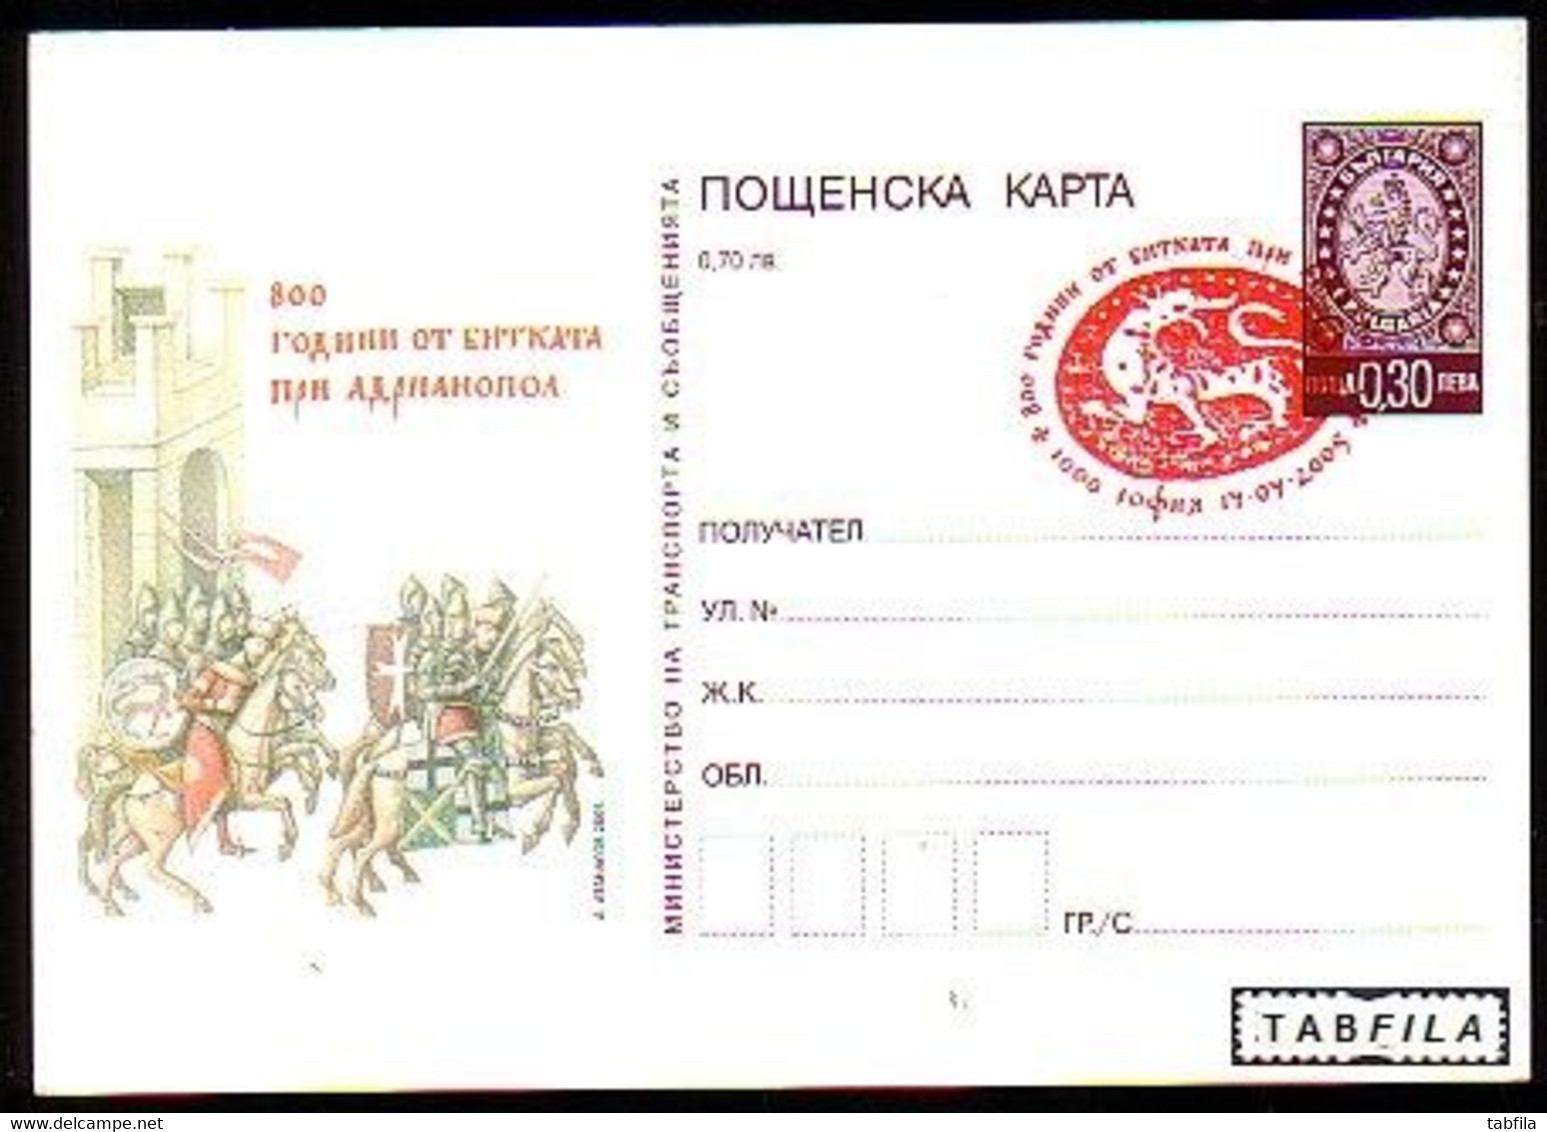 BULGARIA - 2005 - 800 Years Since The Battle Of Adrianople - P.cart Spec Cache - Rare - Cartes Postales